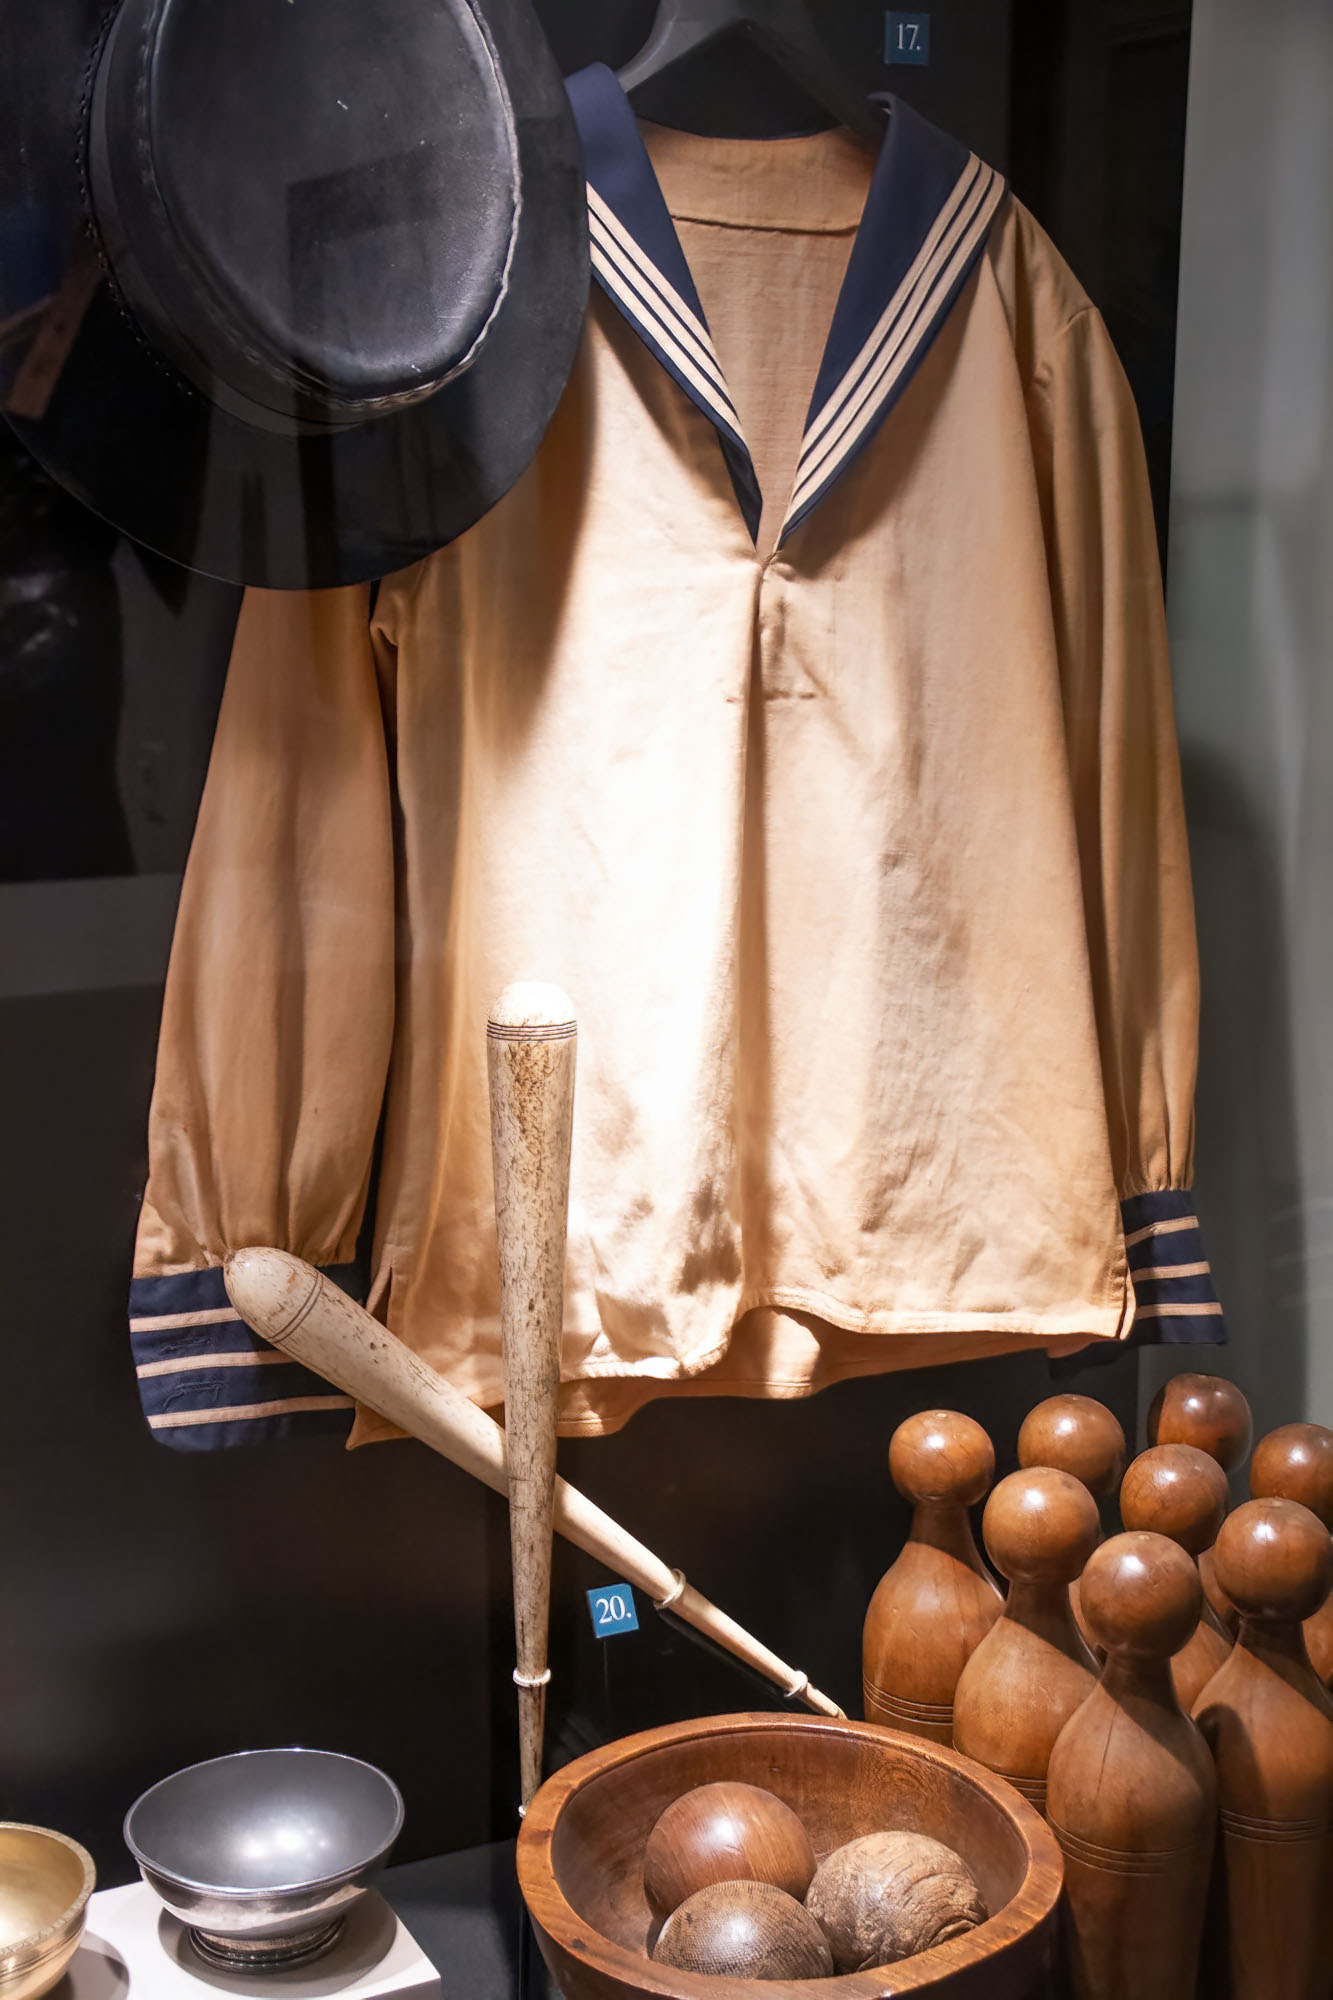 Sailor outfit for baseball